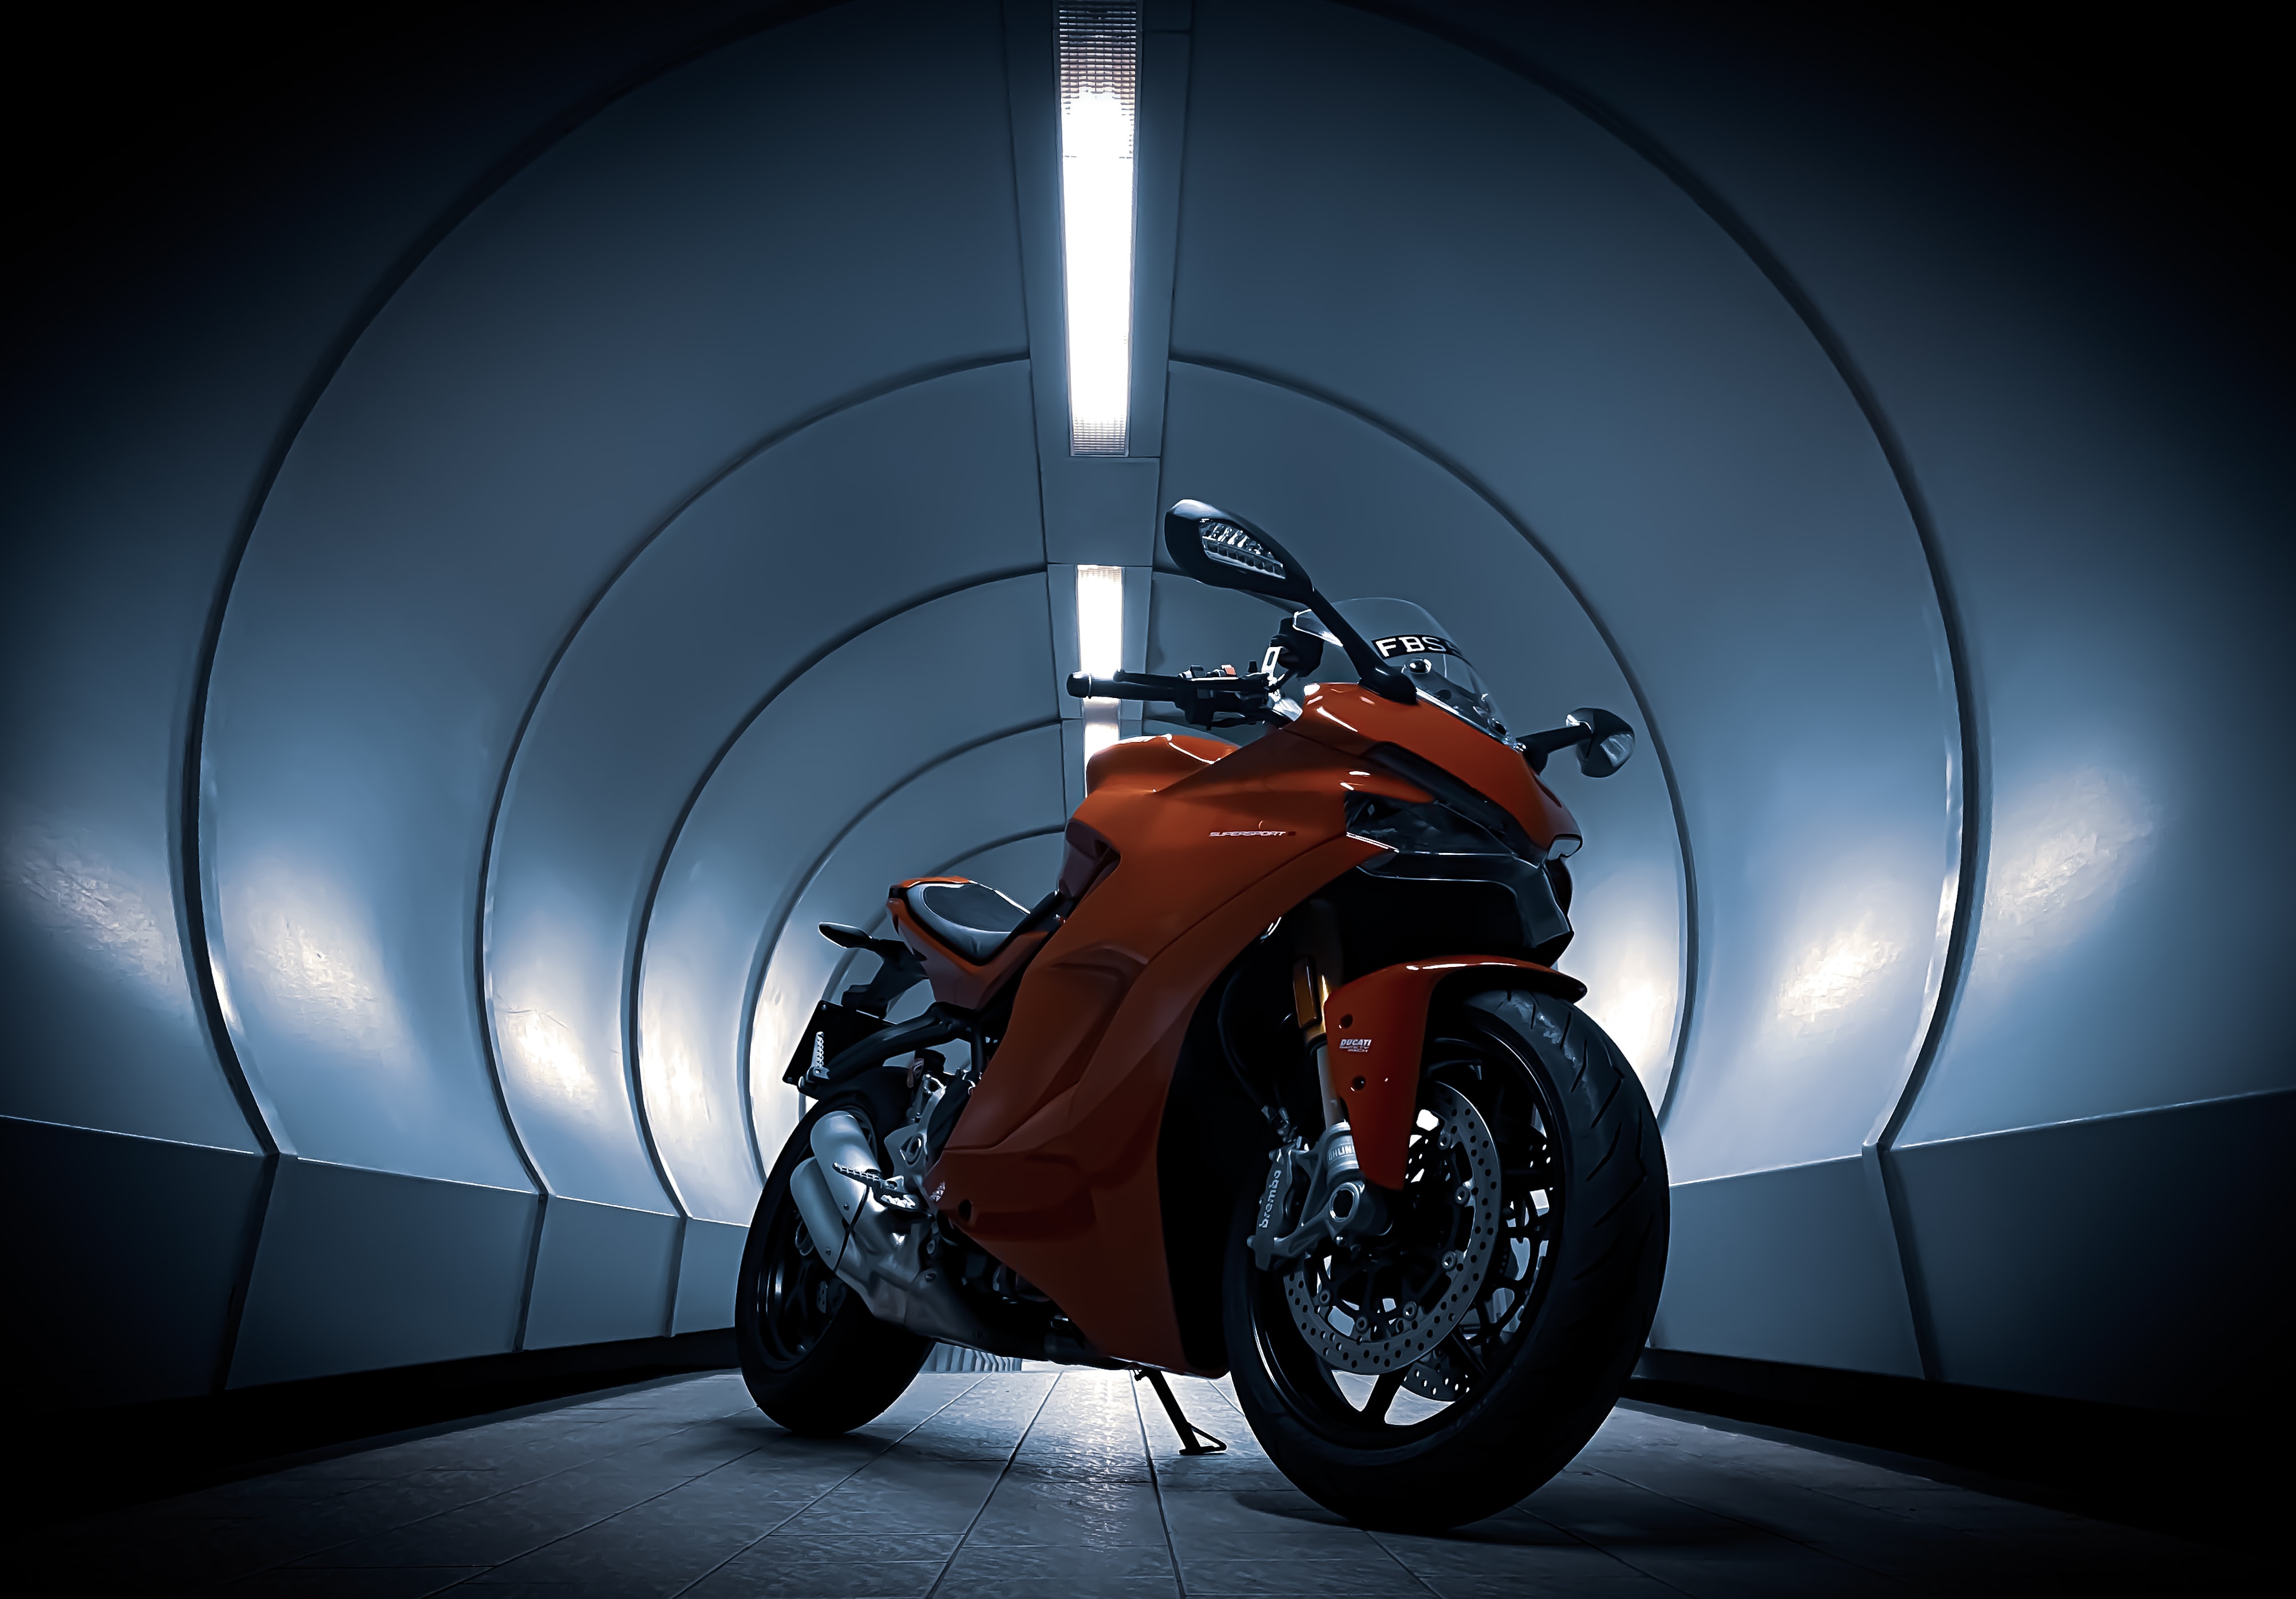 ducati, tunnel, motorcycles, red, motorcycle Full HD